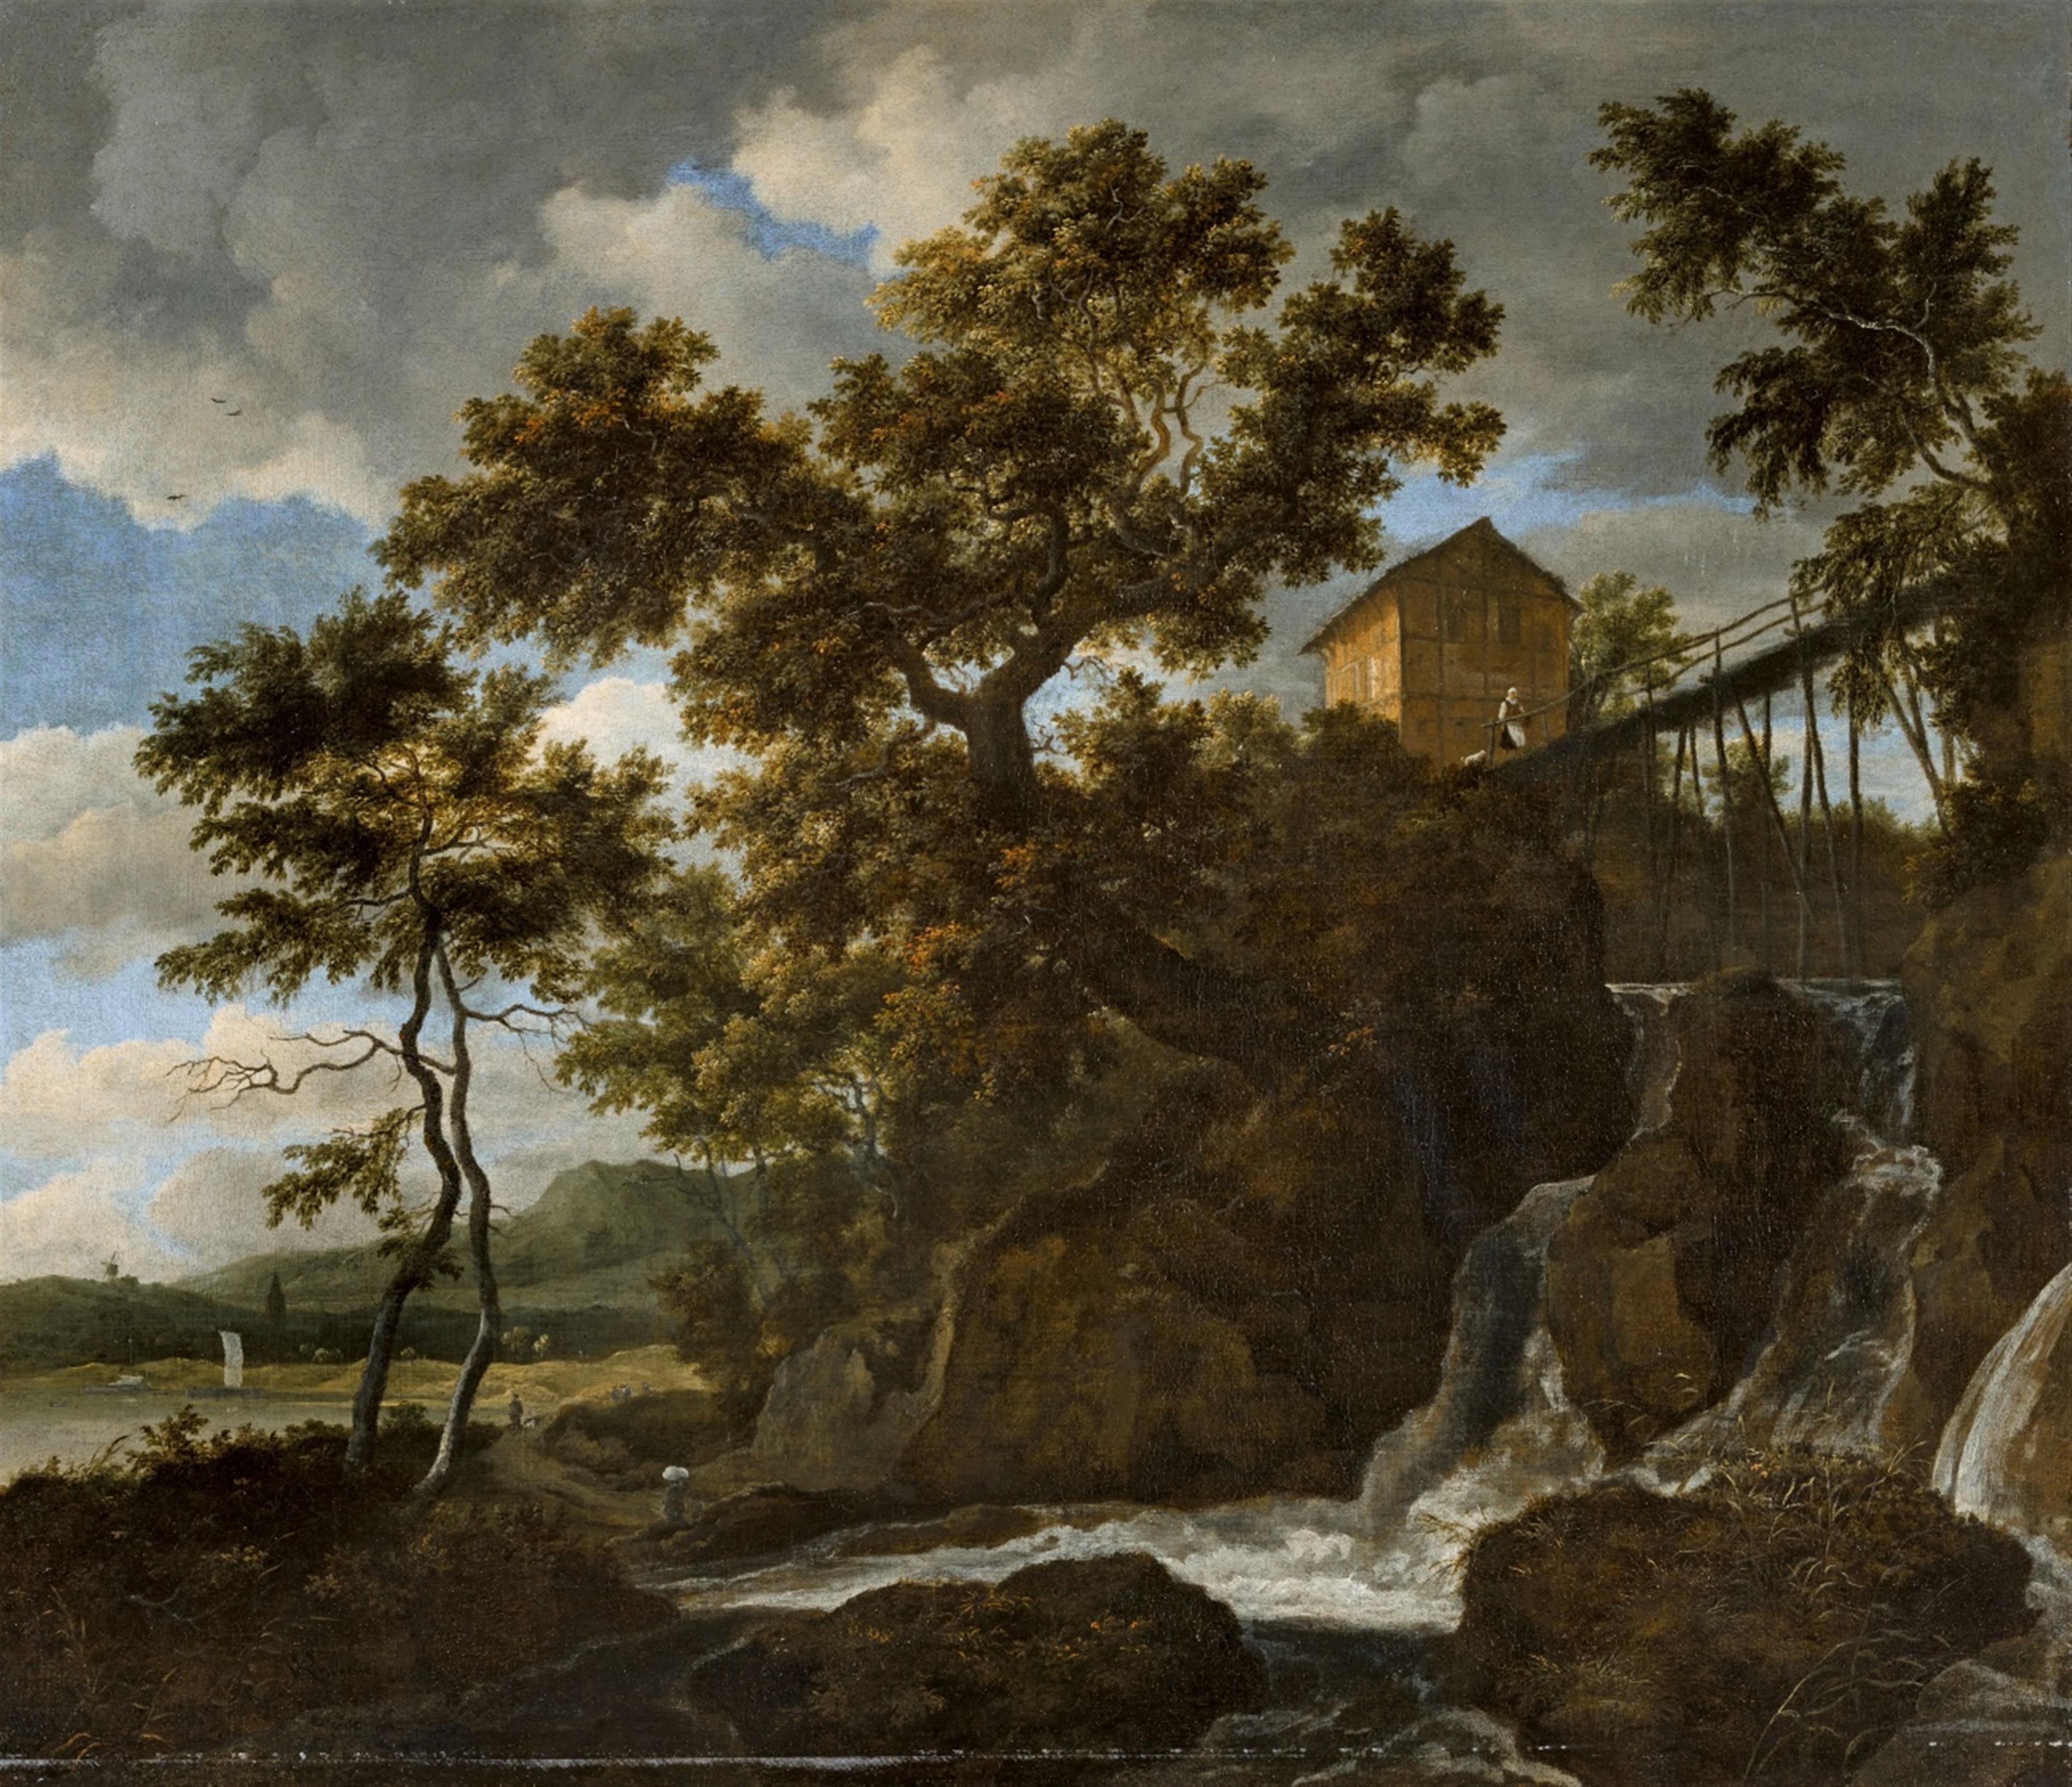 Jacob van Ruisdael - Landscape with a Waterfall, Cottage, and Bridge - image-1